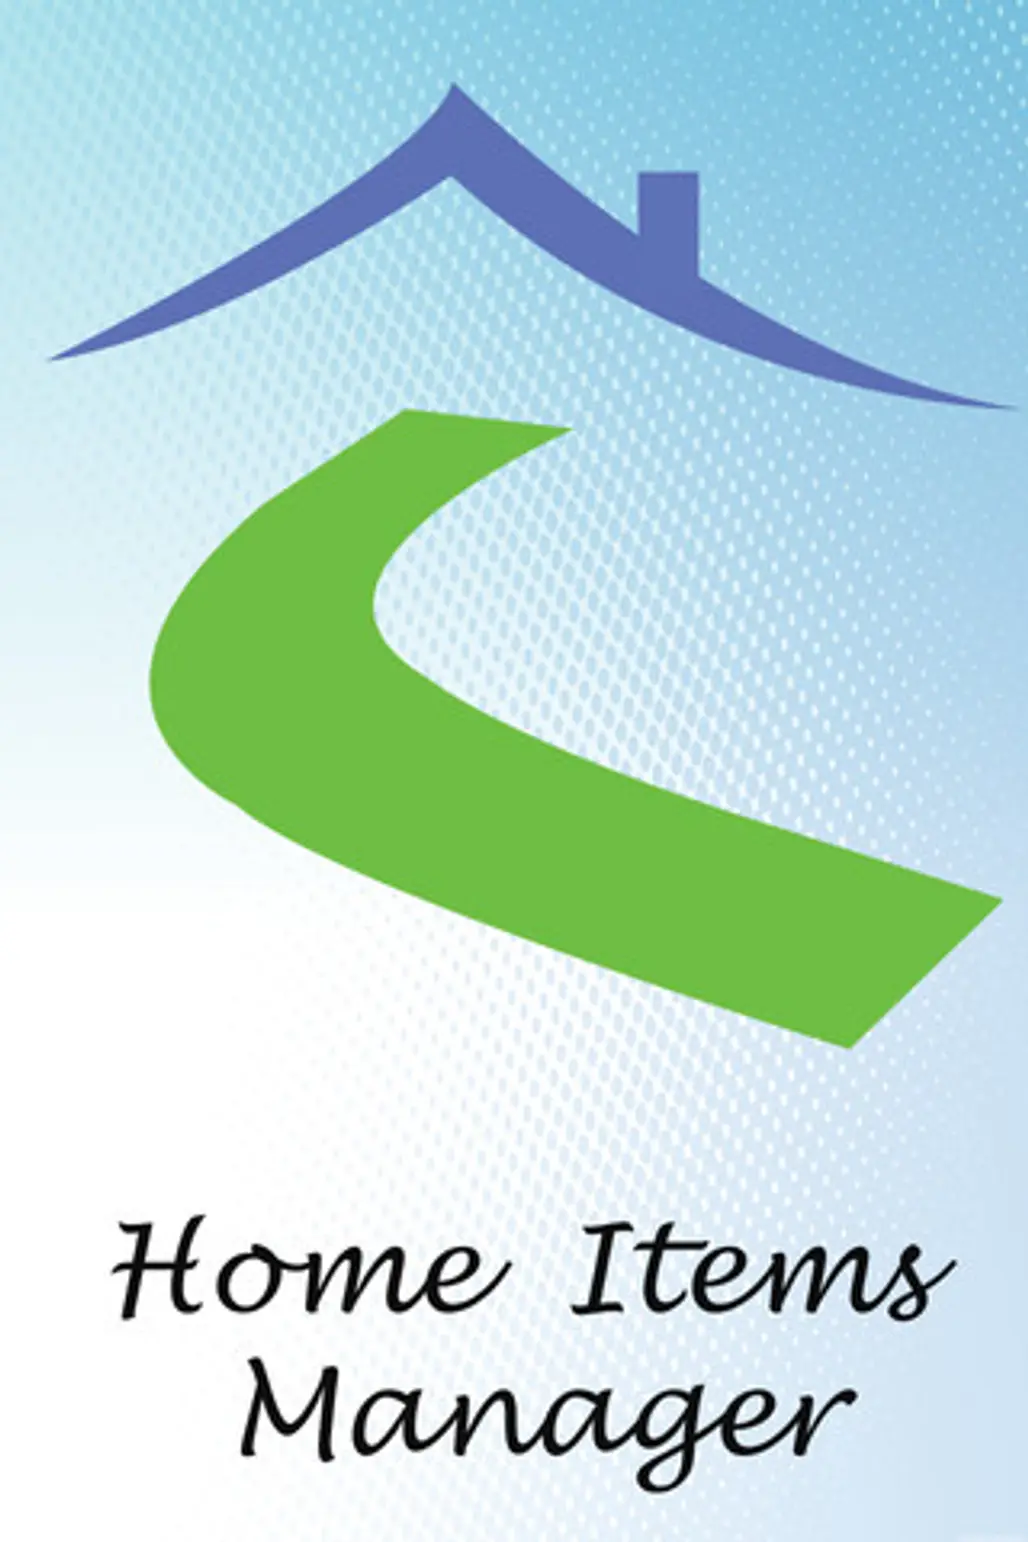 Home Items Manager